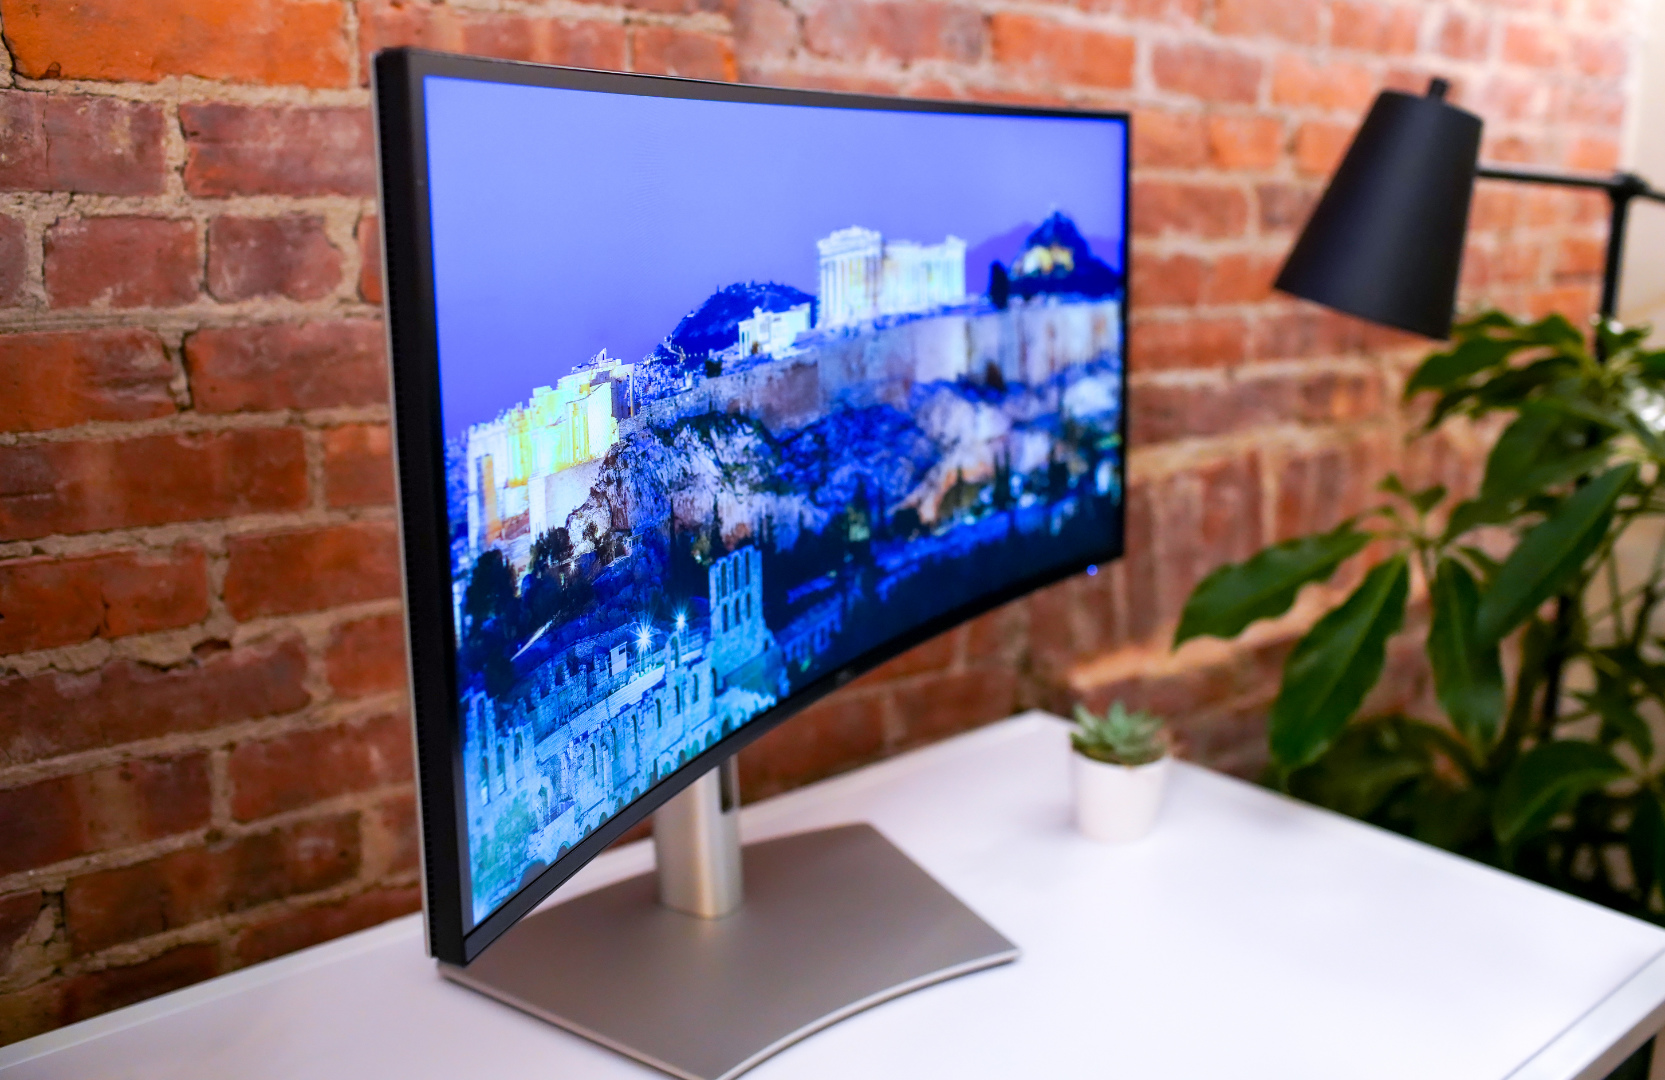 Dell UltraSharp 34 Curved Thunderbolt Hub U3425WE debuts with Thunderbolt 4 connectivity and 120Hz panel